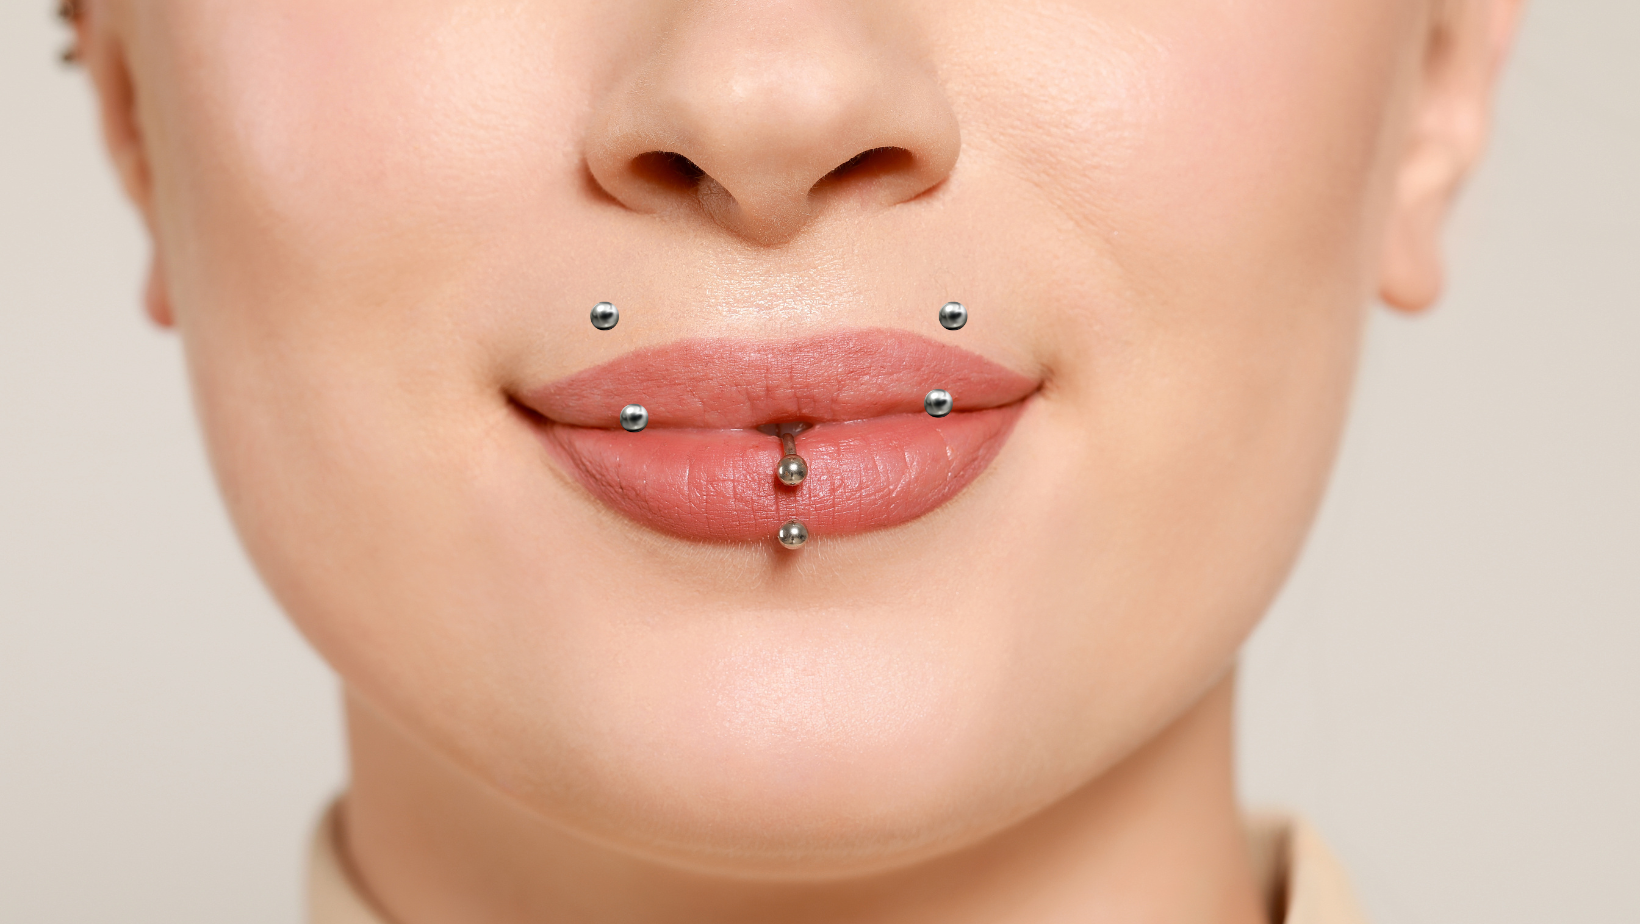 What are Angel Fang Piercings?